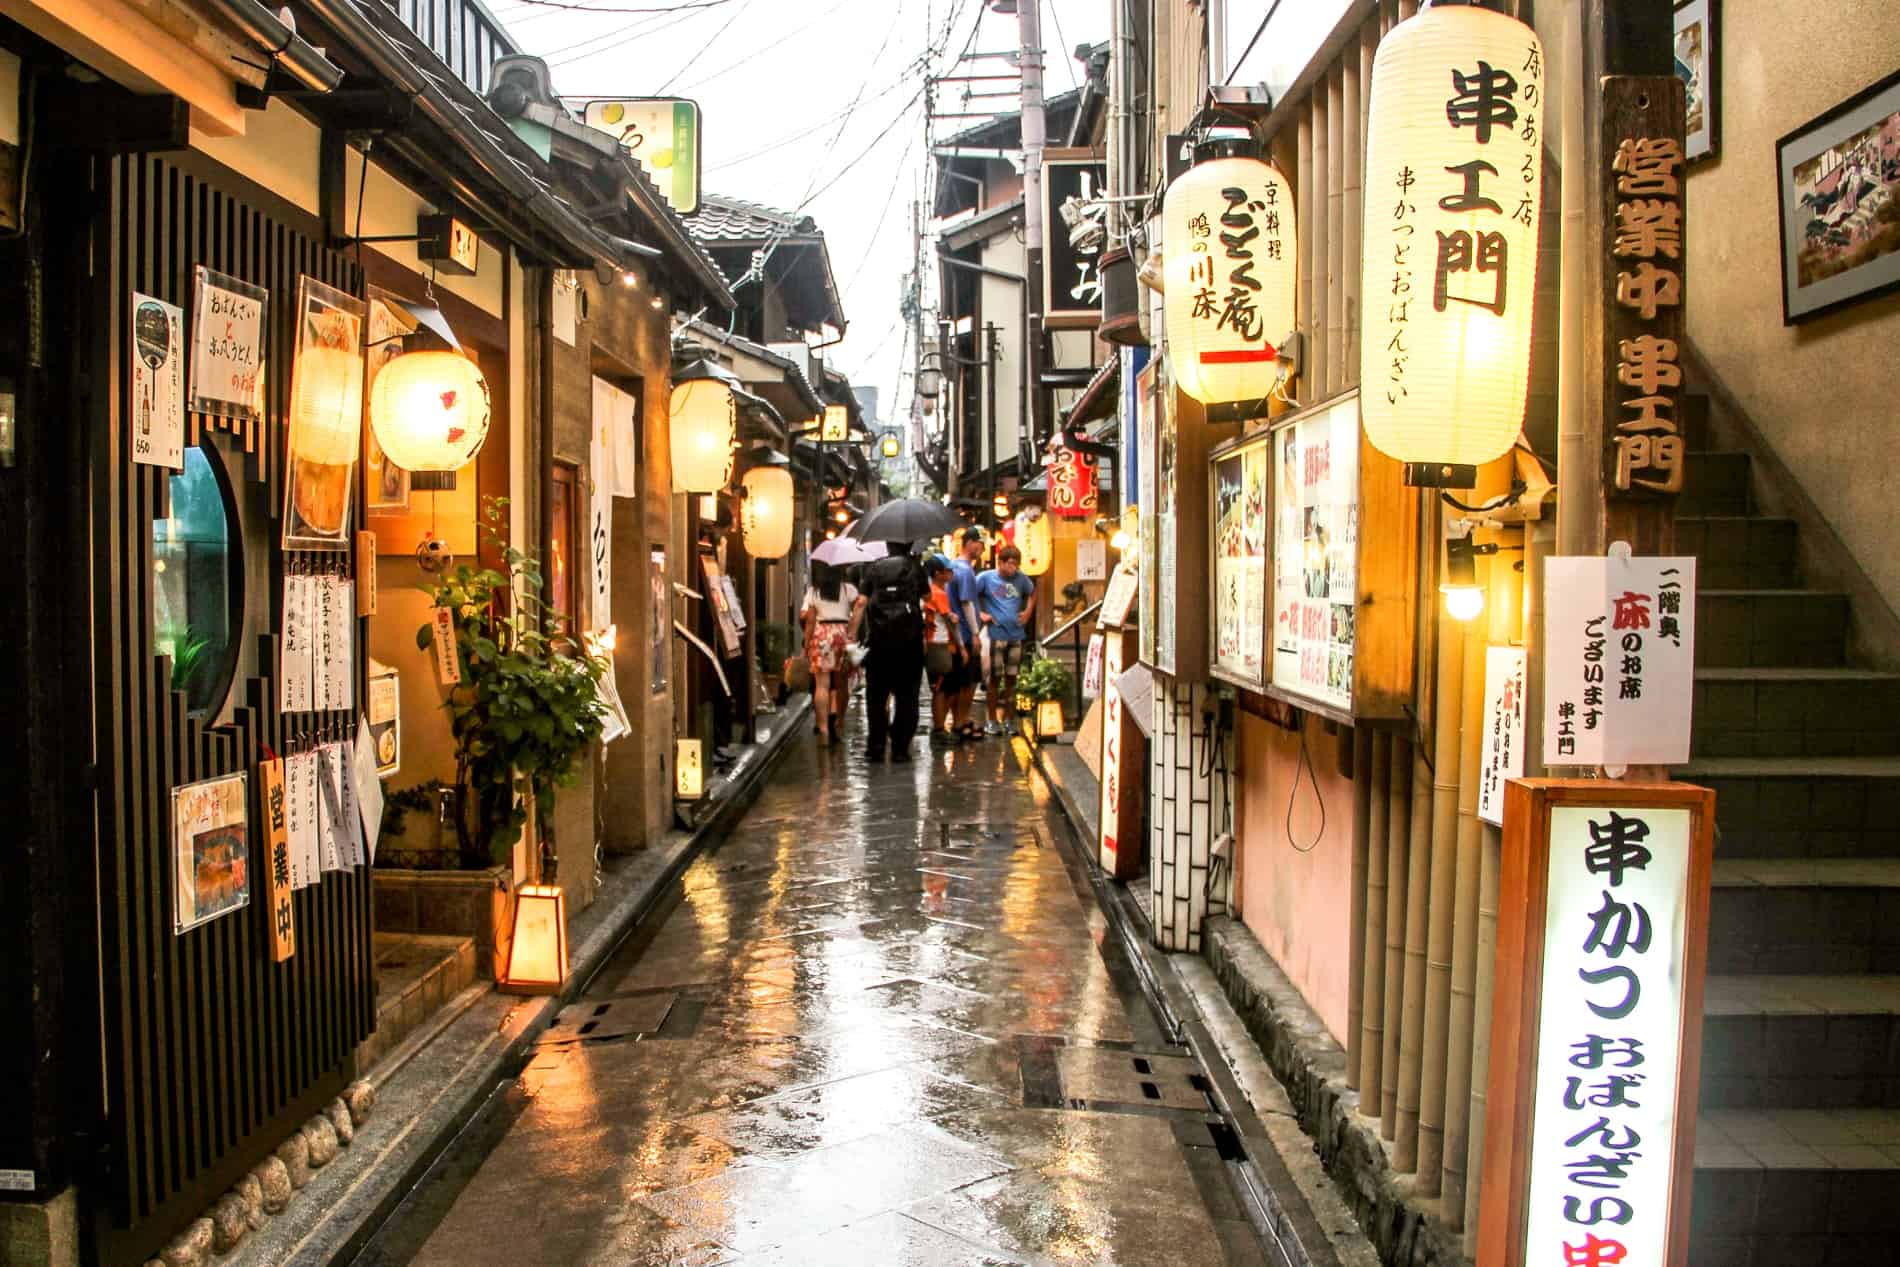 People in a narrow street of wooden houses and shops in Gion, Kyoto. 